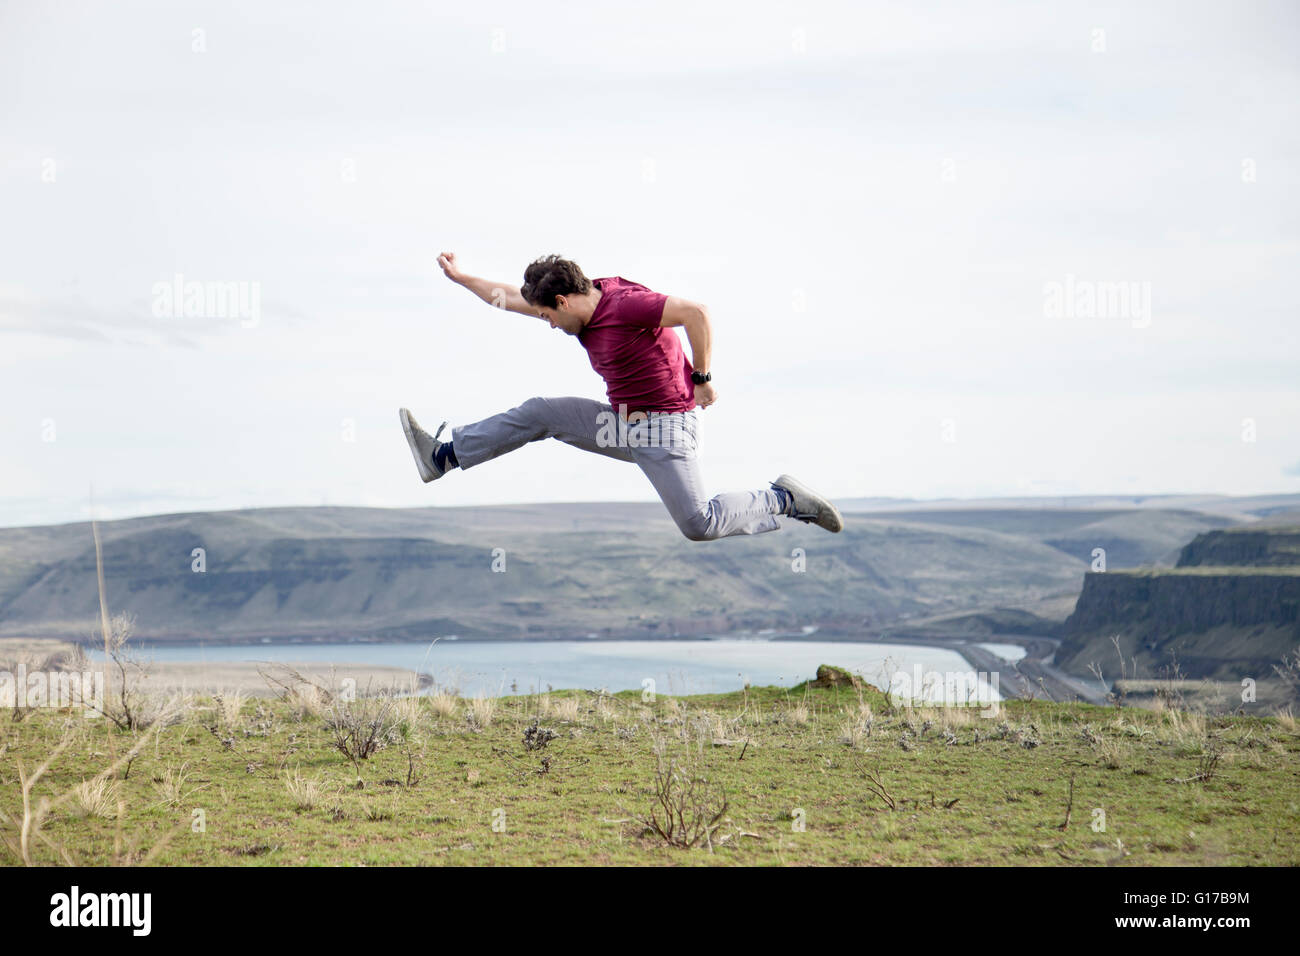 Man jumping, in mid air, on mountain top, Colombia River Gorge, Washington, USA Stock Photo